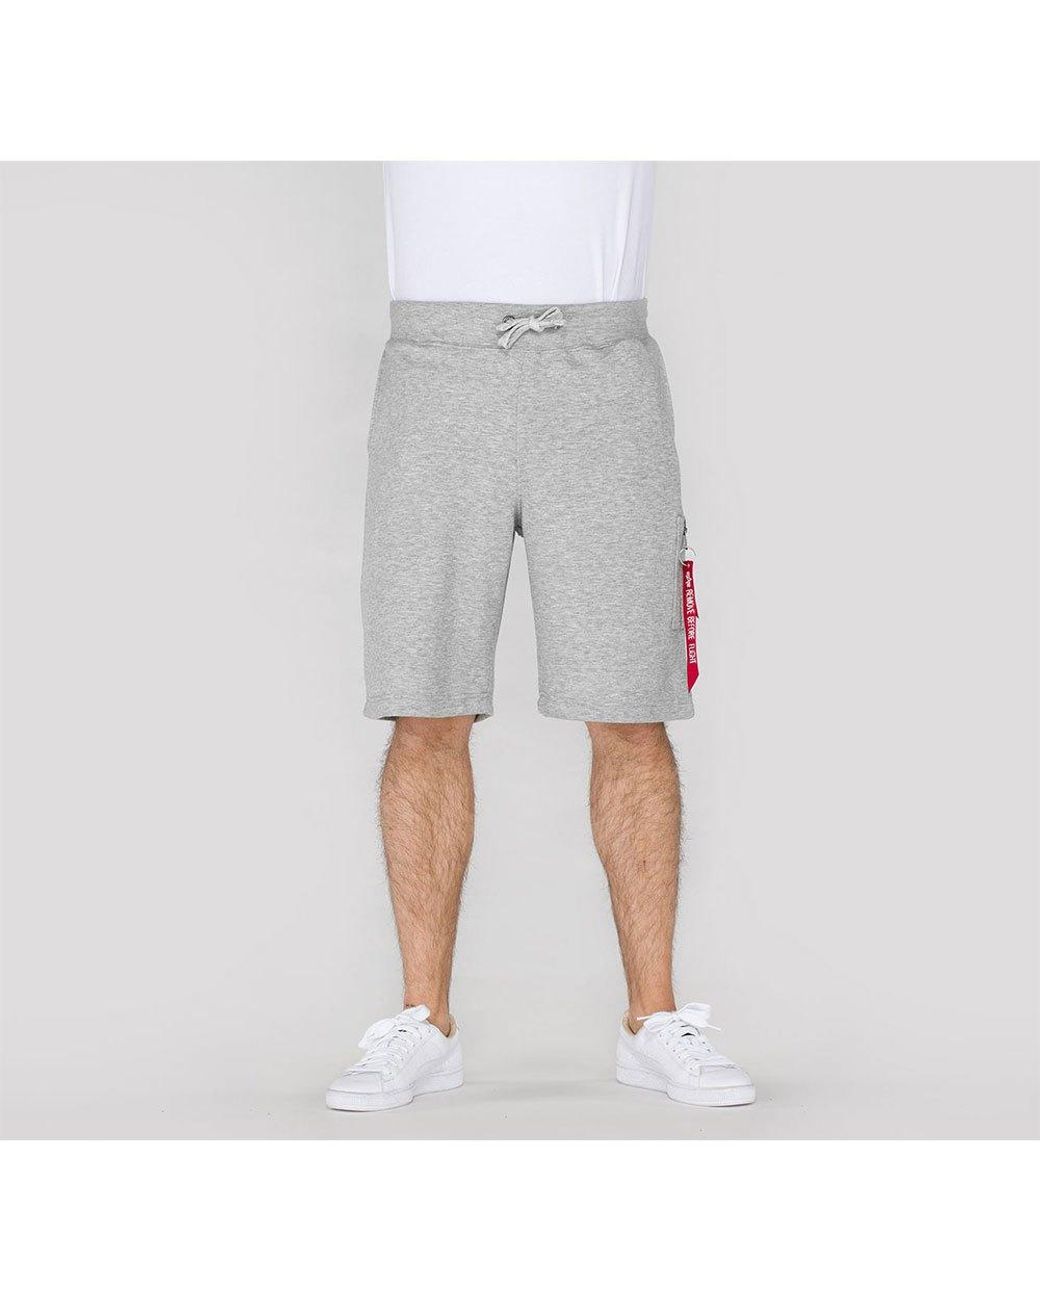 Alpha Industries Cotton X-fit Cargo Shorts in Grey Heather (Gray) for Men -  Lyst